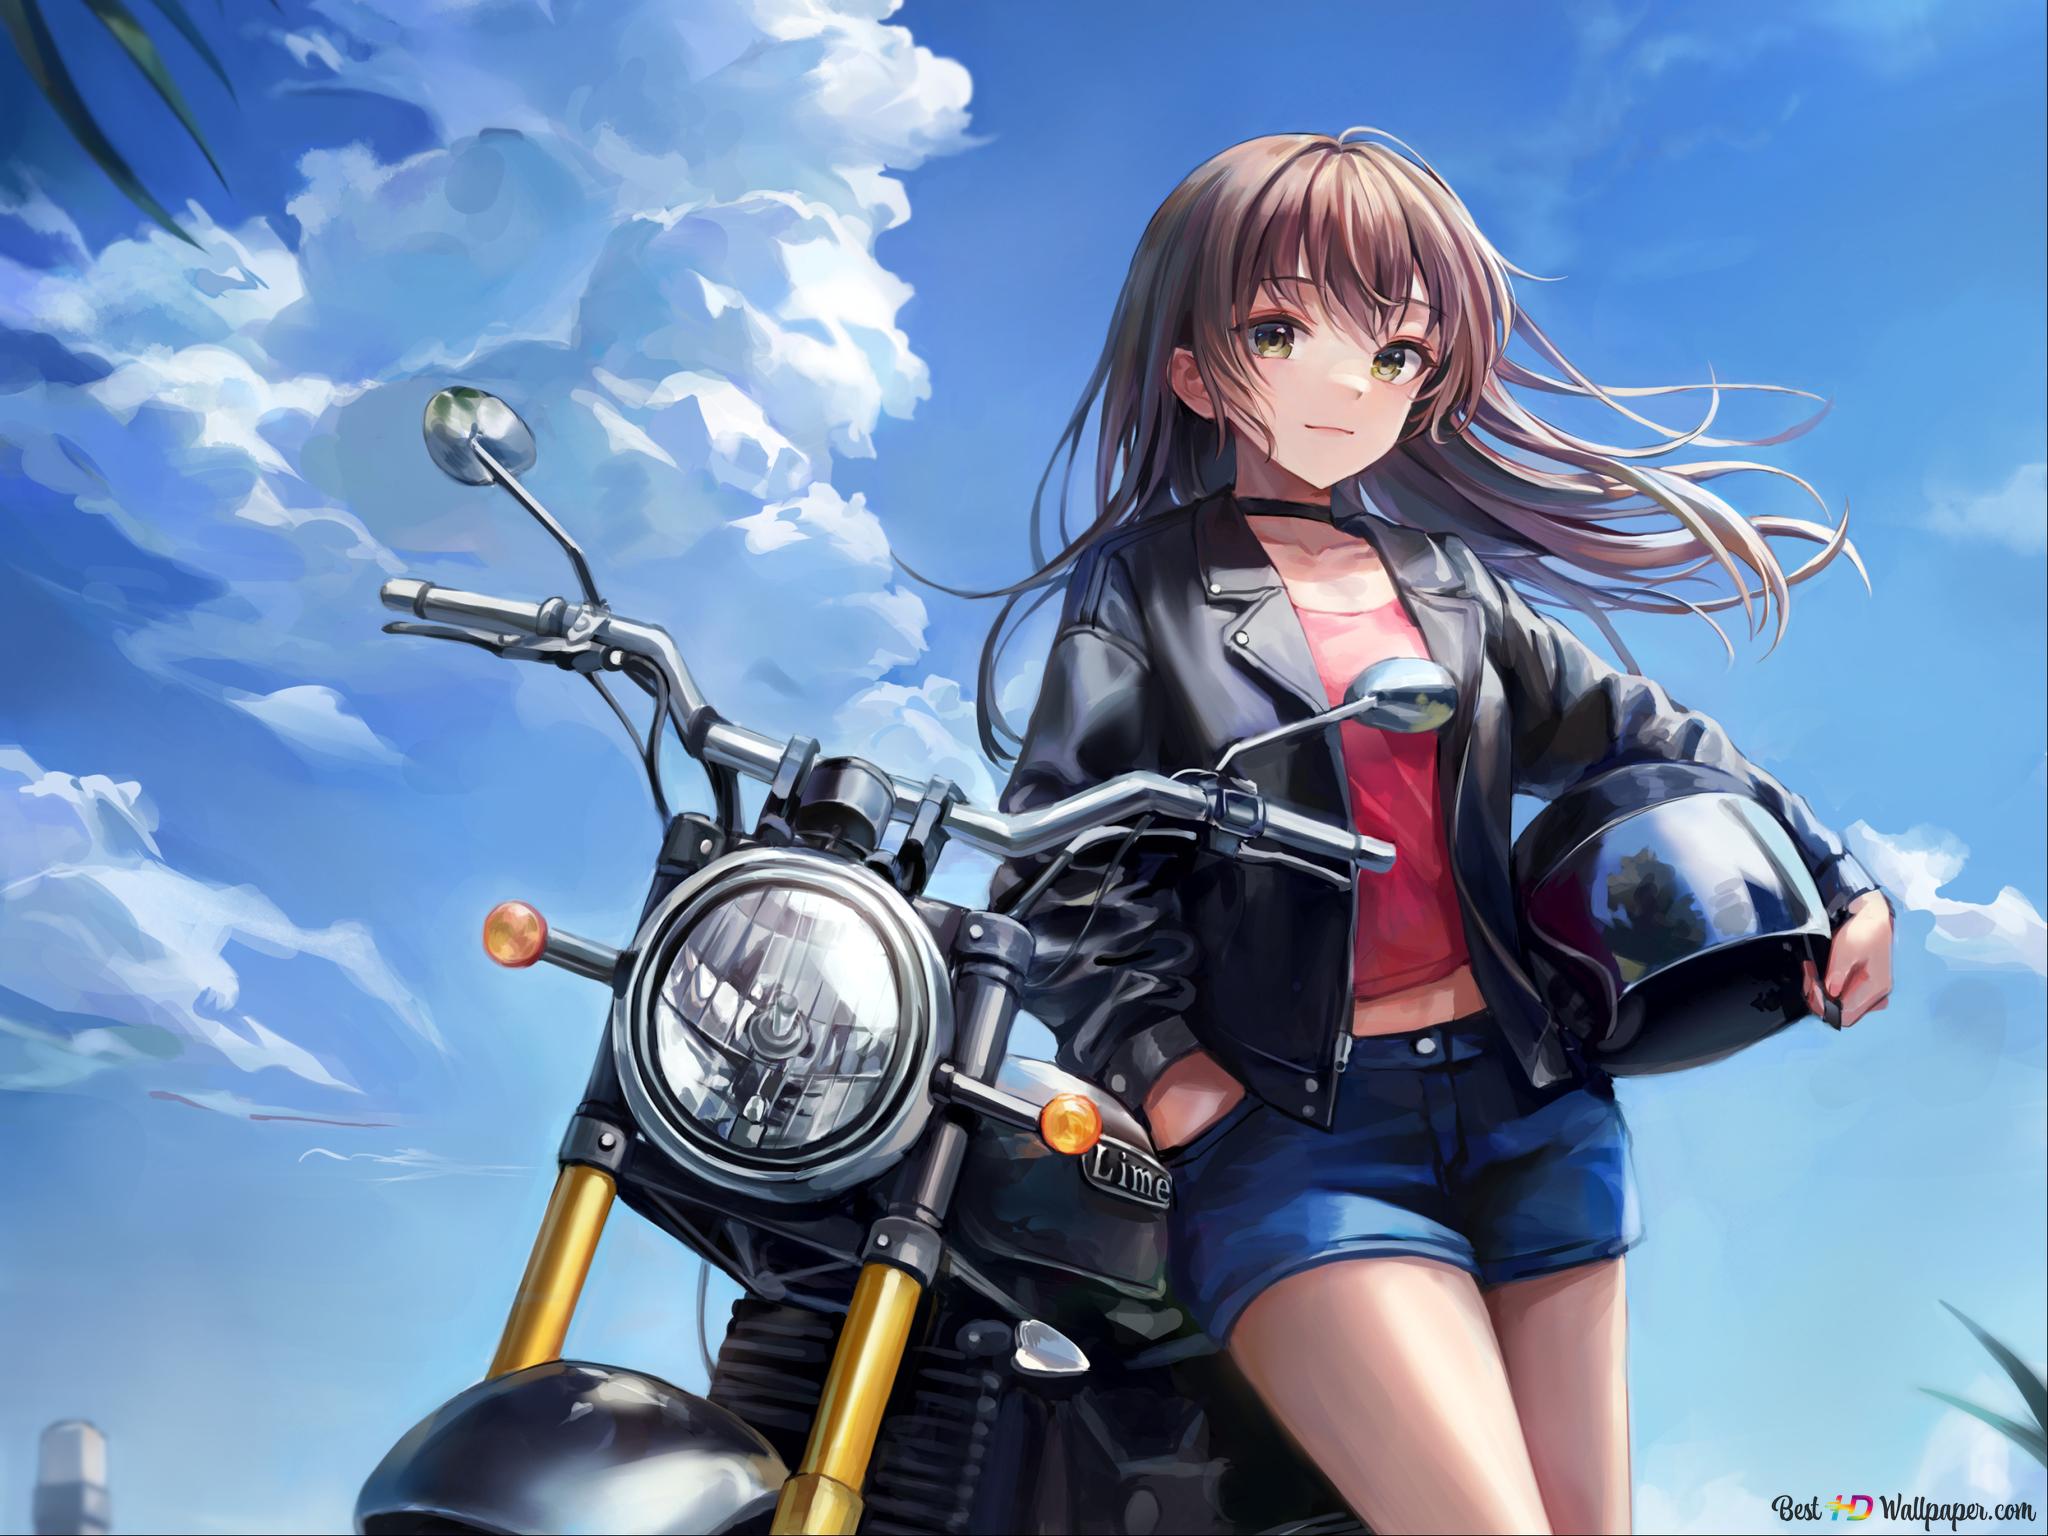 Stance of beautiful anime girl near motorcycle posing with cloudy sky view 2K wallpaper download